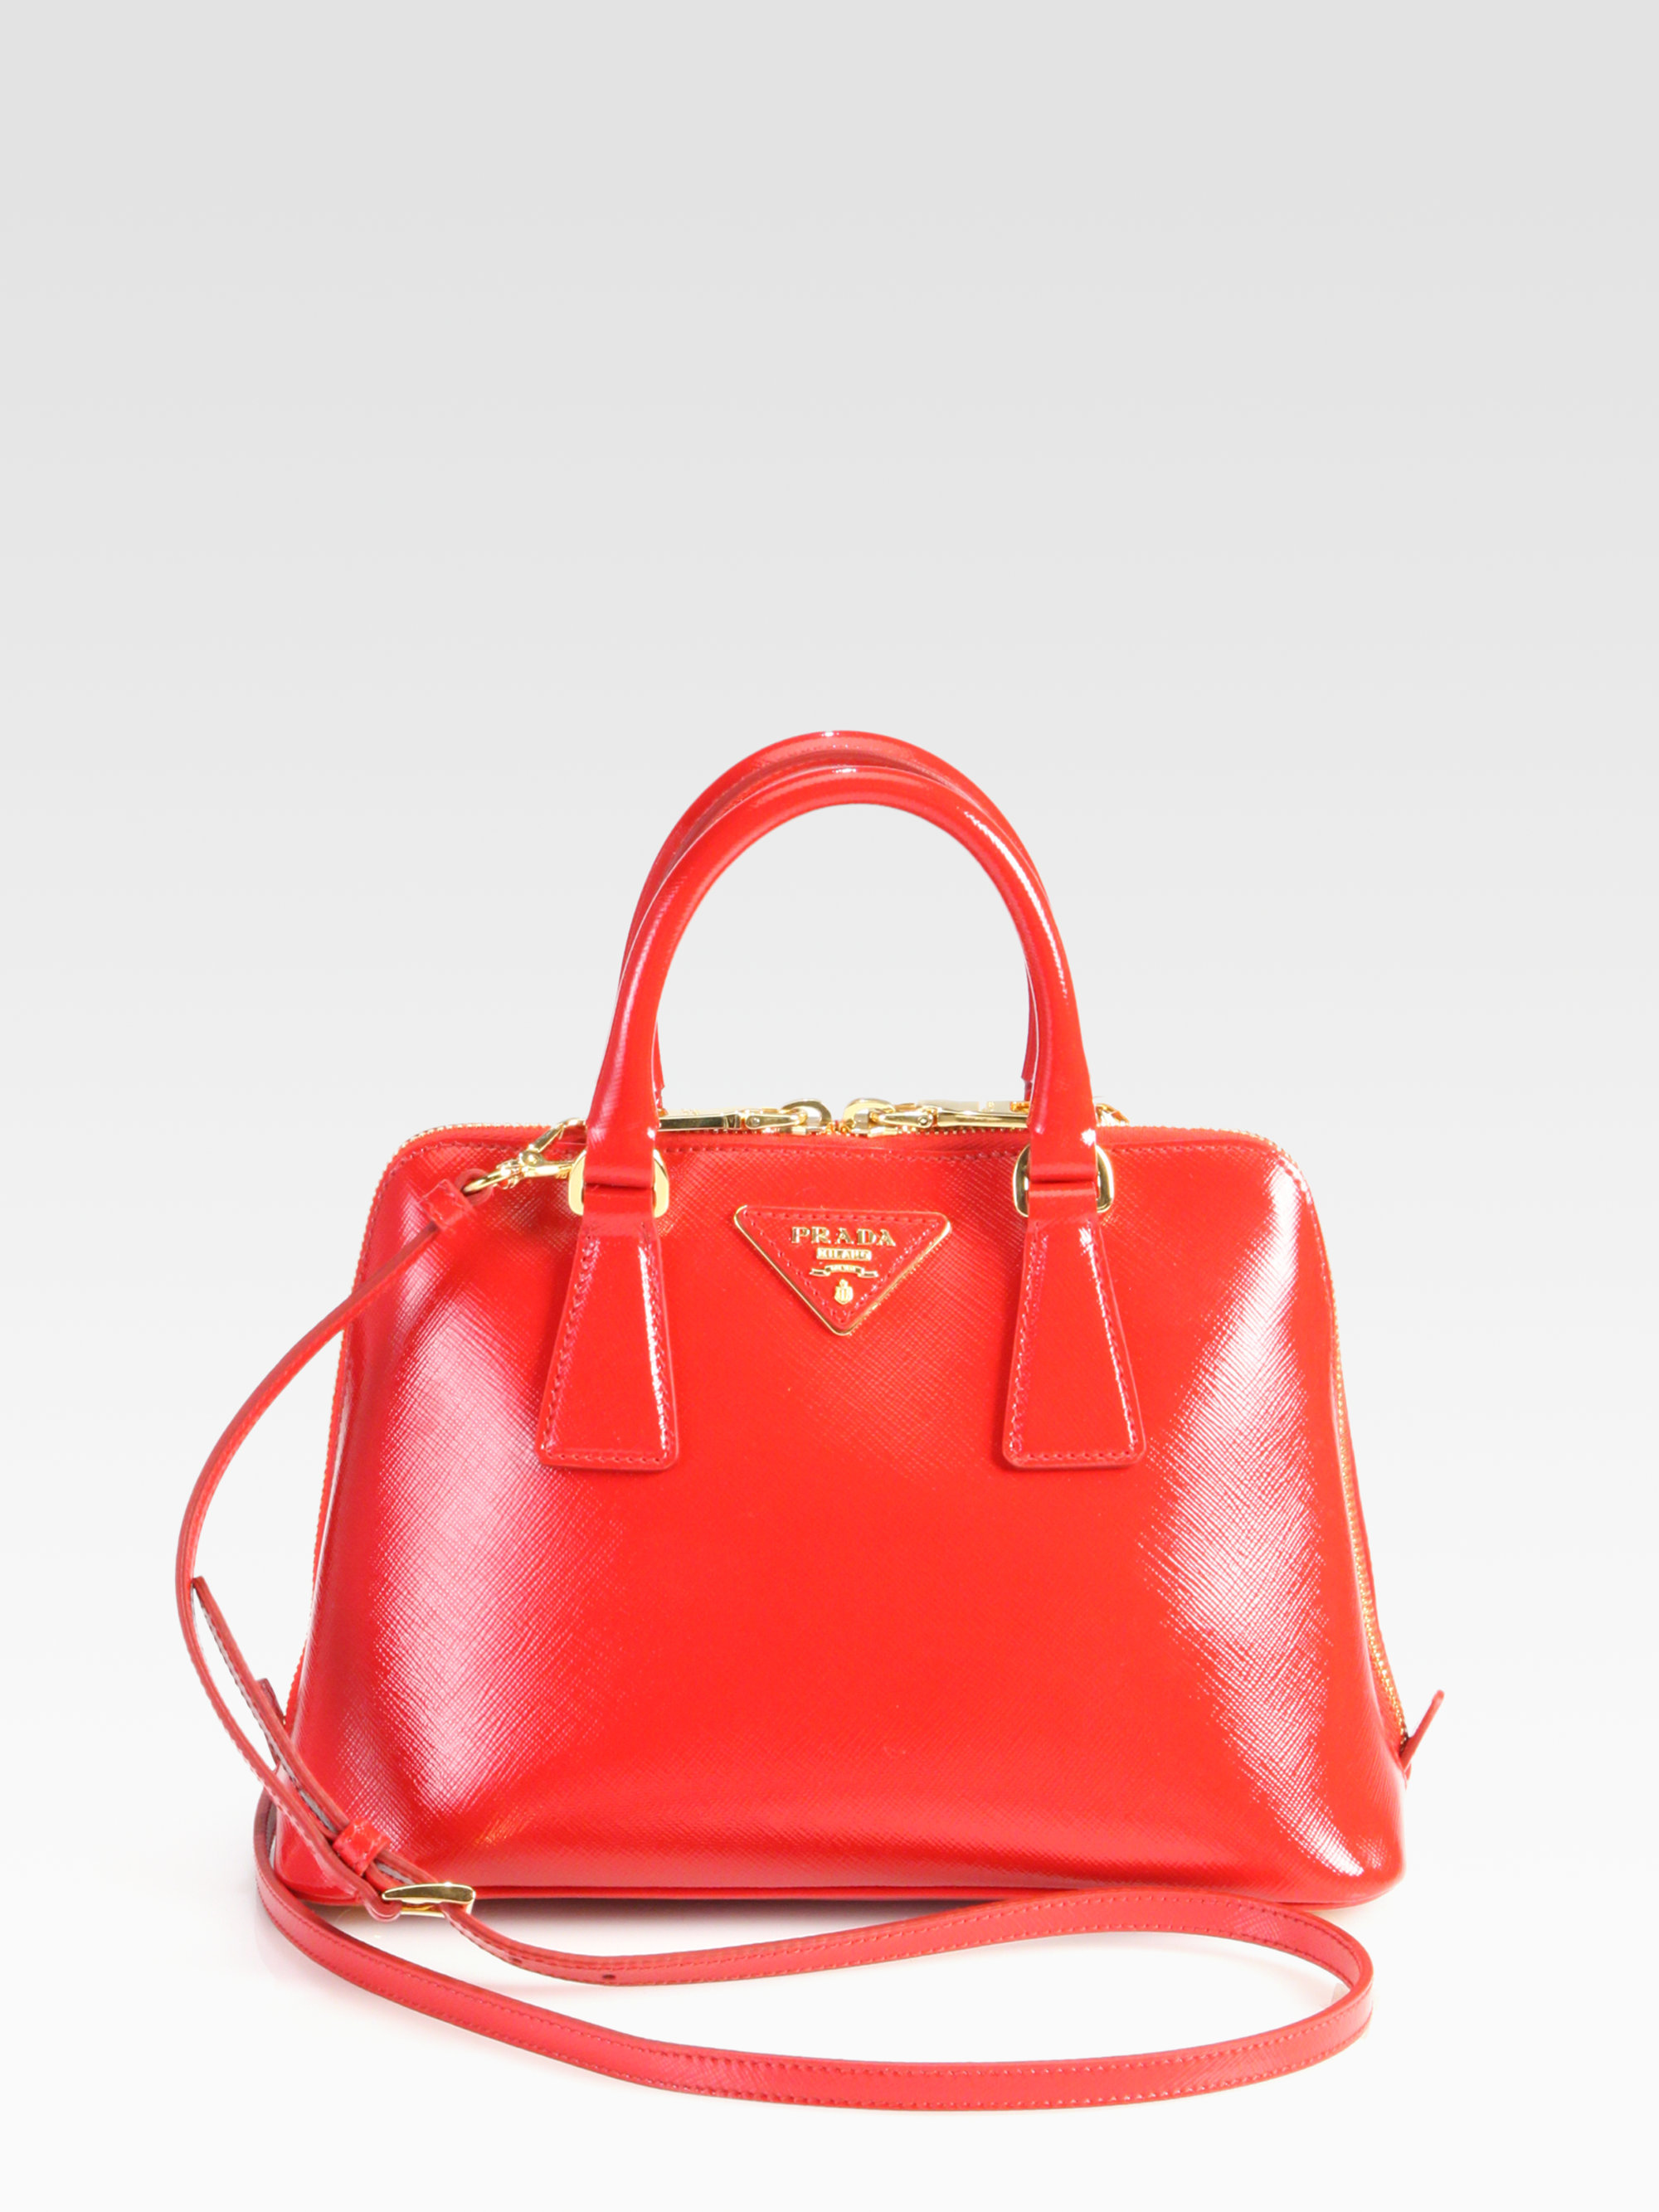 Prada Saffiano Vernice Small Round Tophandle Bag in Red | Lyst